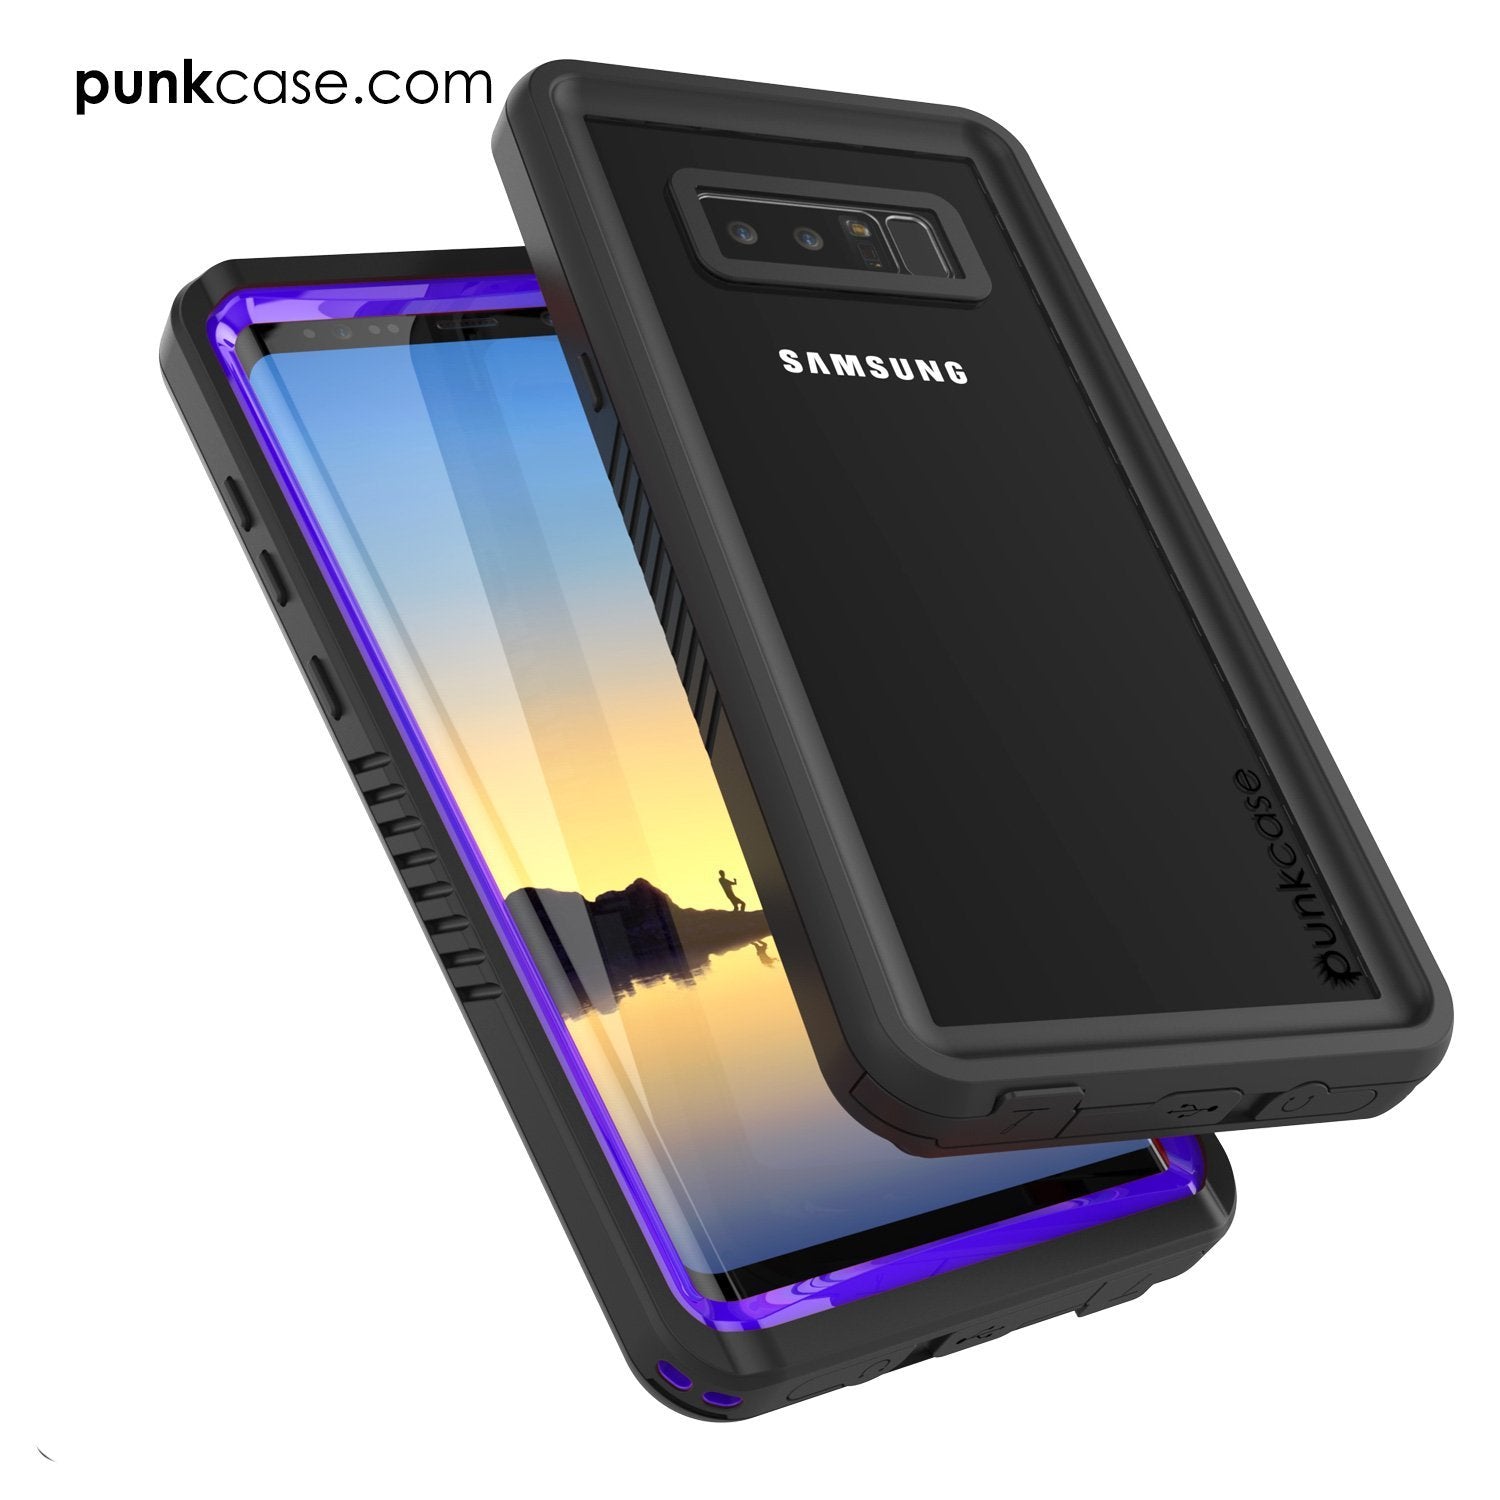 Galaxy Note 8 Case, Punkcase [Extreme Series] [Slim Fit] [IP68 Certified] [Shockproof] Armor Cover W/ Built In Screen Protector [Purple]